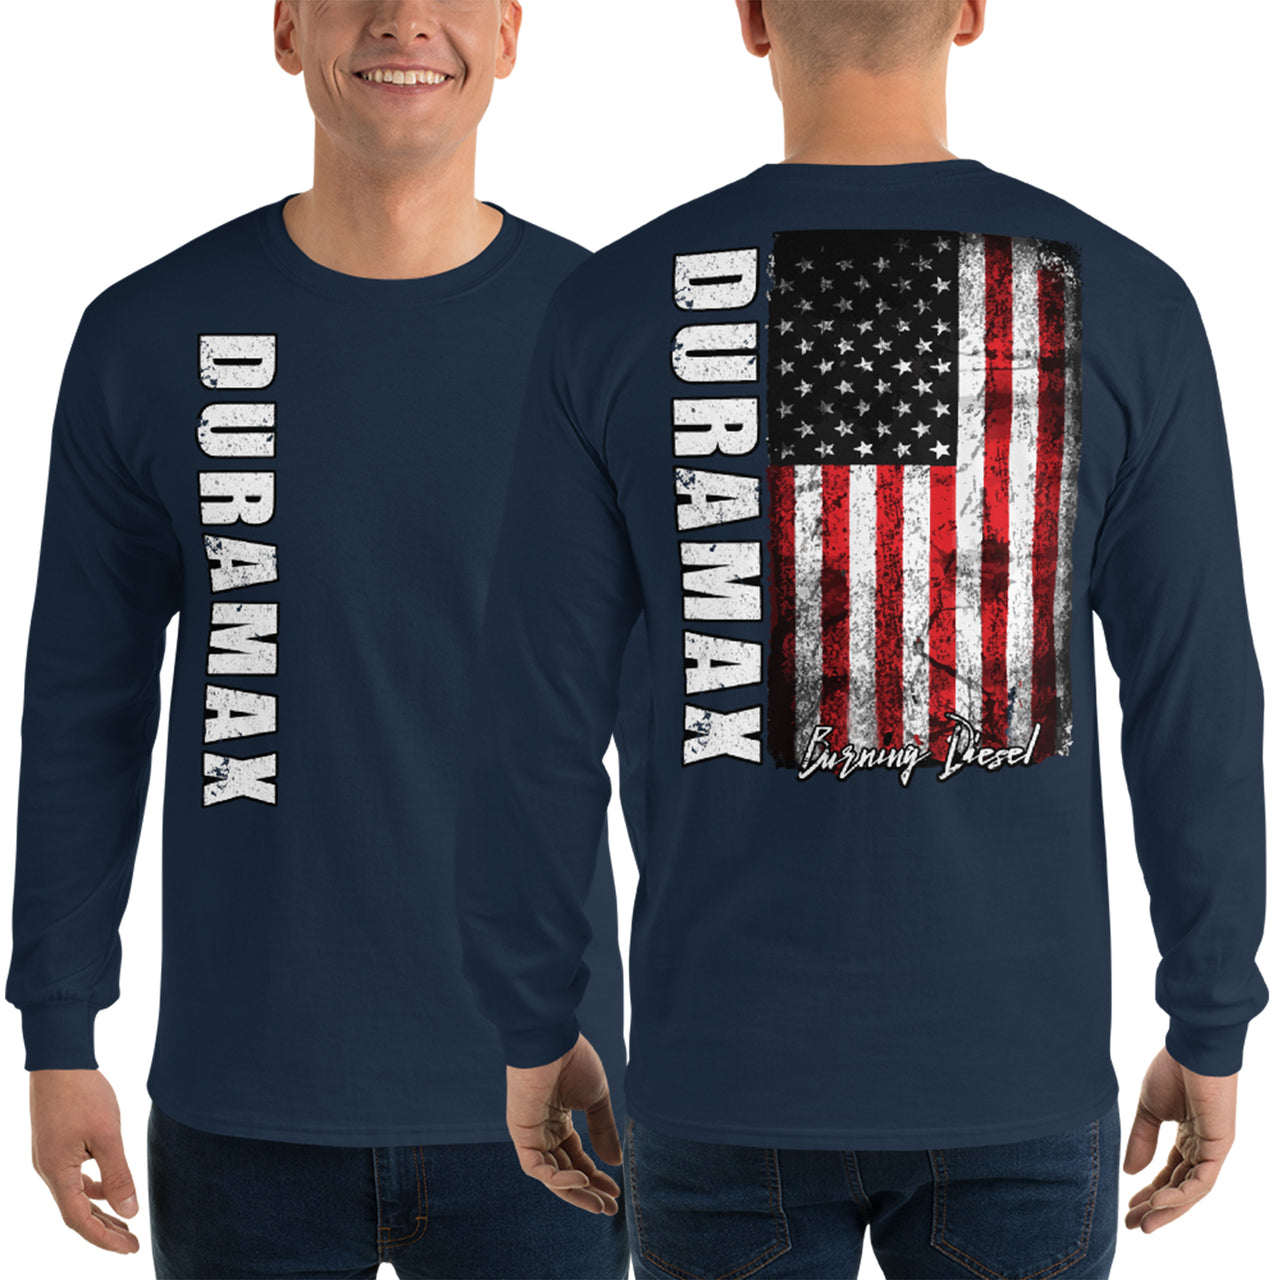 Duramax Shirt With American Flag Design Mens Long Sleeve T-Shirt modeled in navy